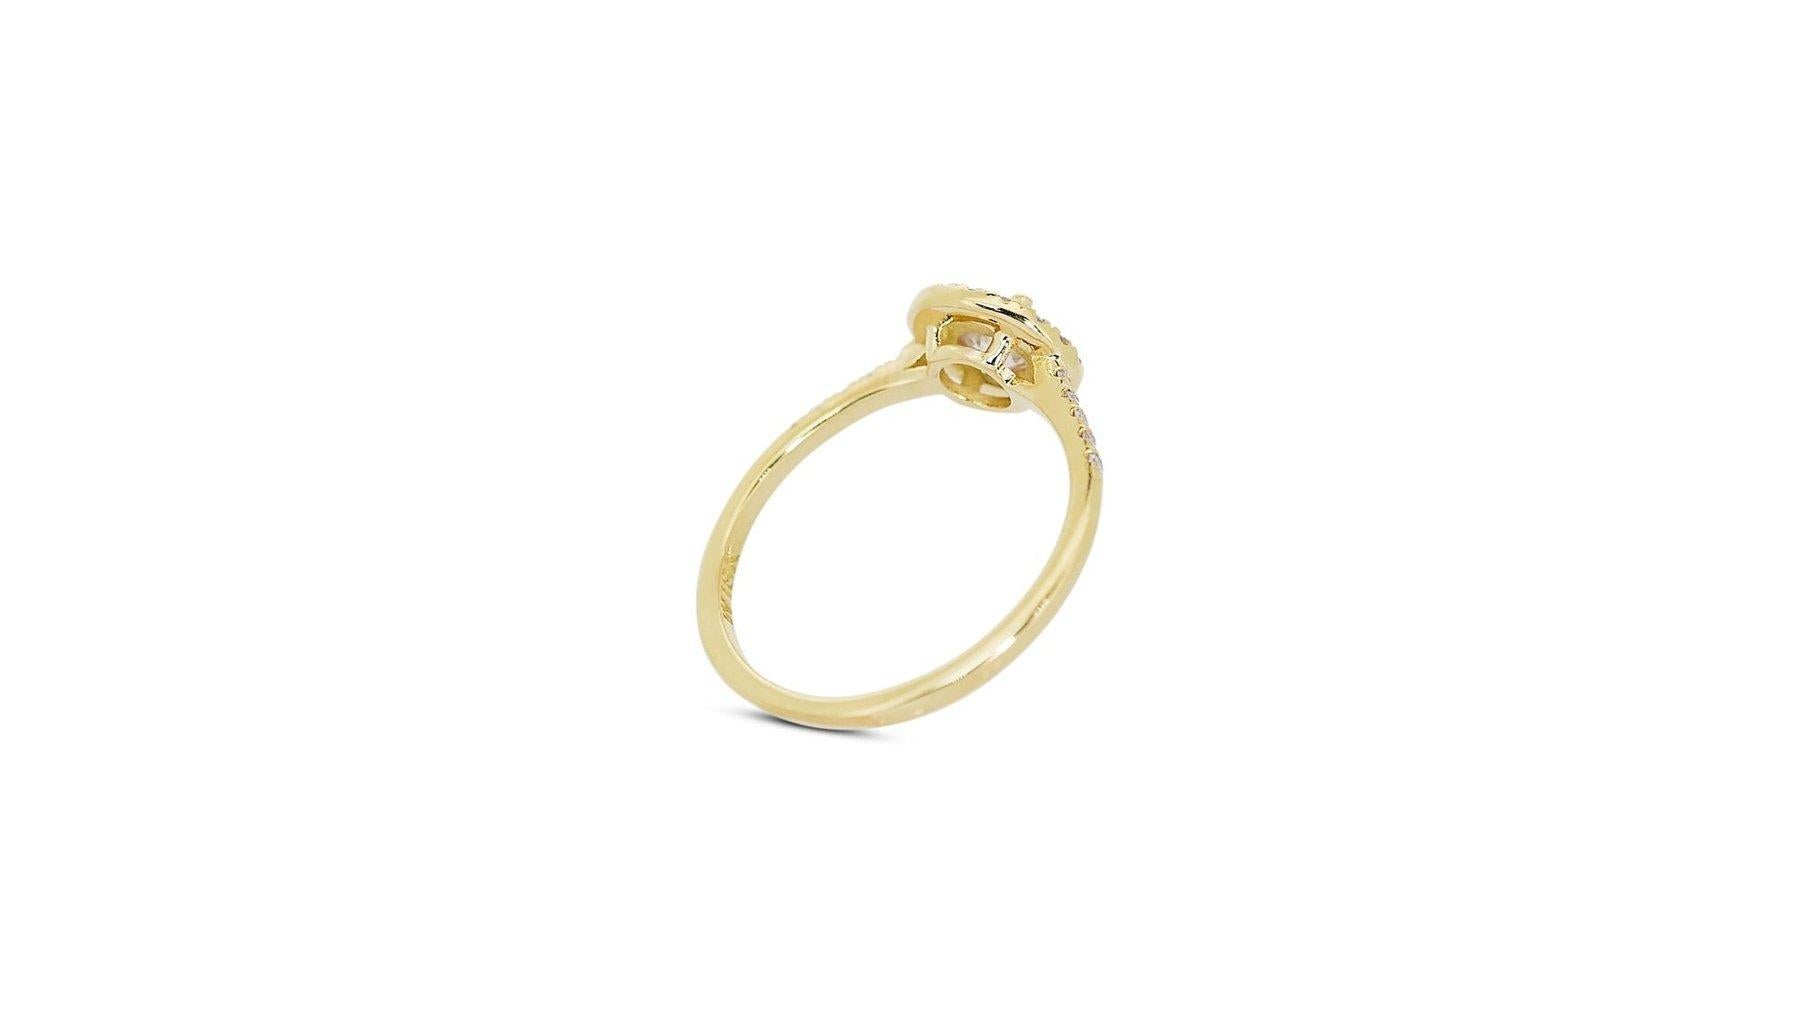 Dazzling 1.36ct Diamonds Halo Ring in 18k Yellow Gold - GIA Certified In New Condition For Sale In רמת גן, IL